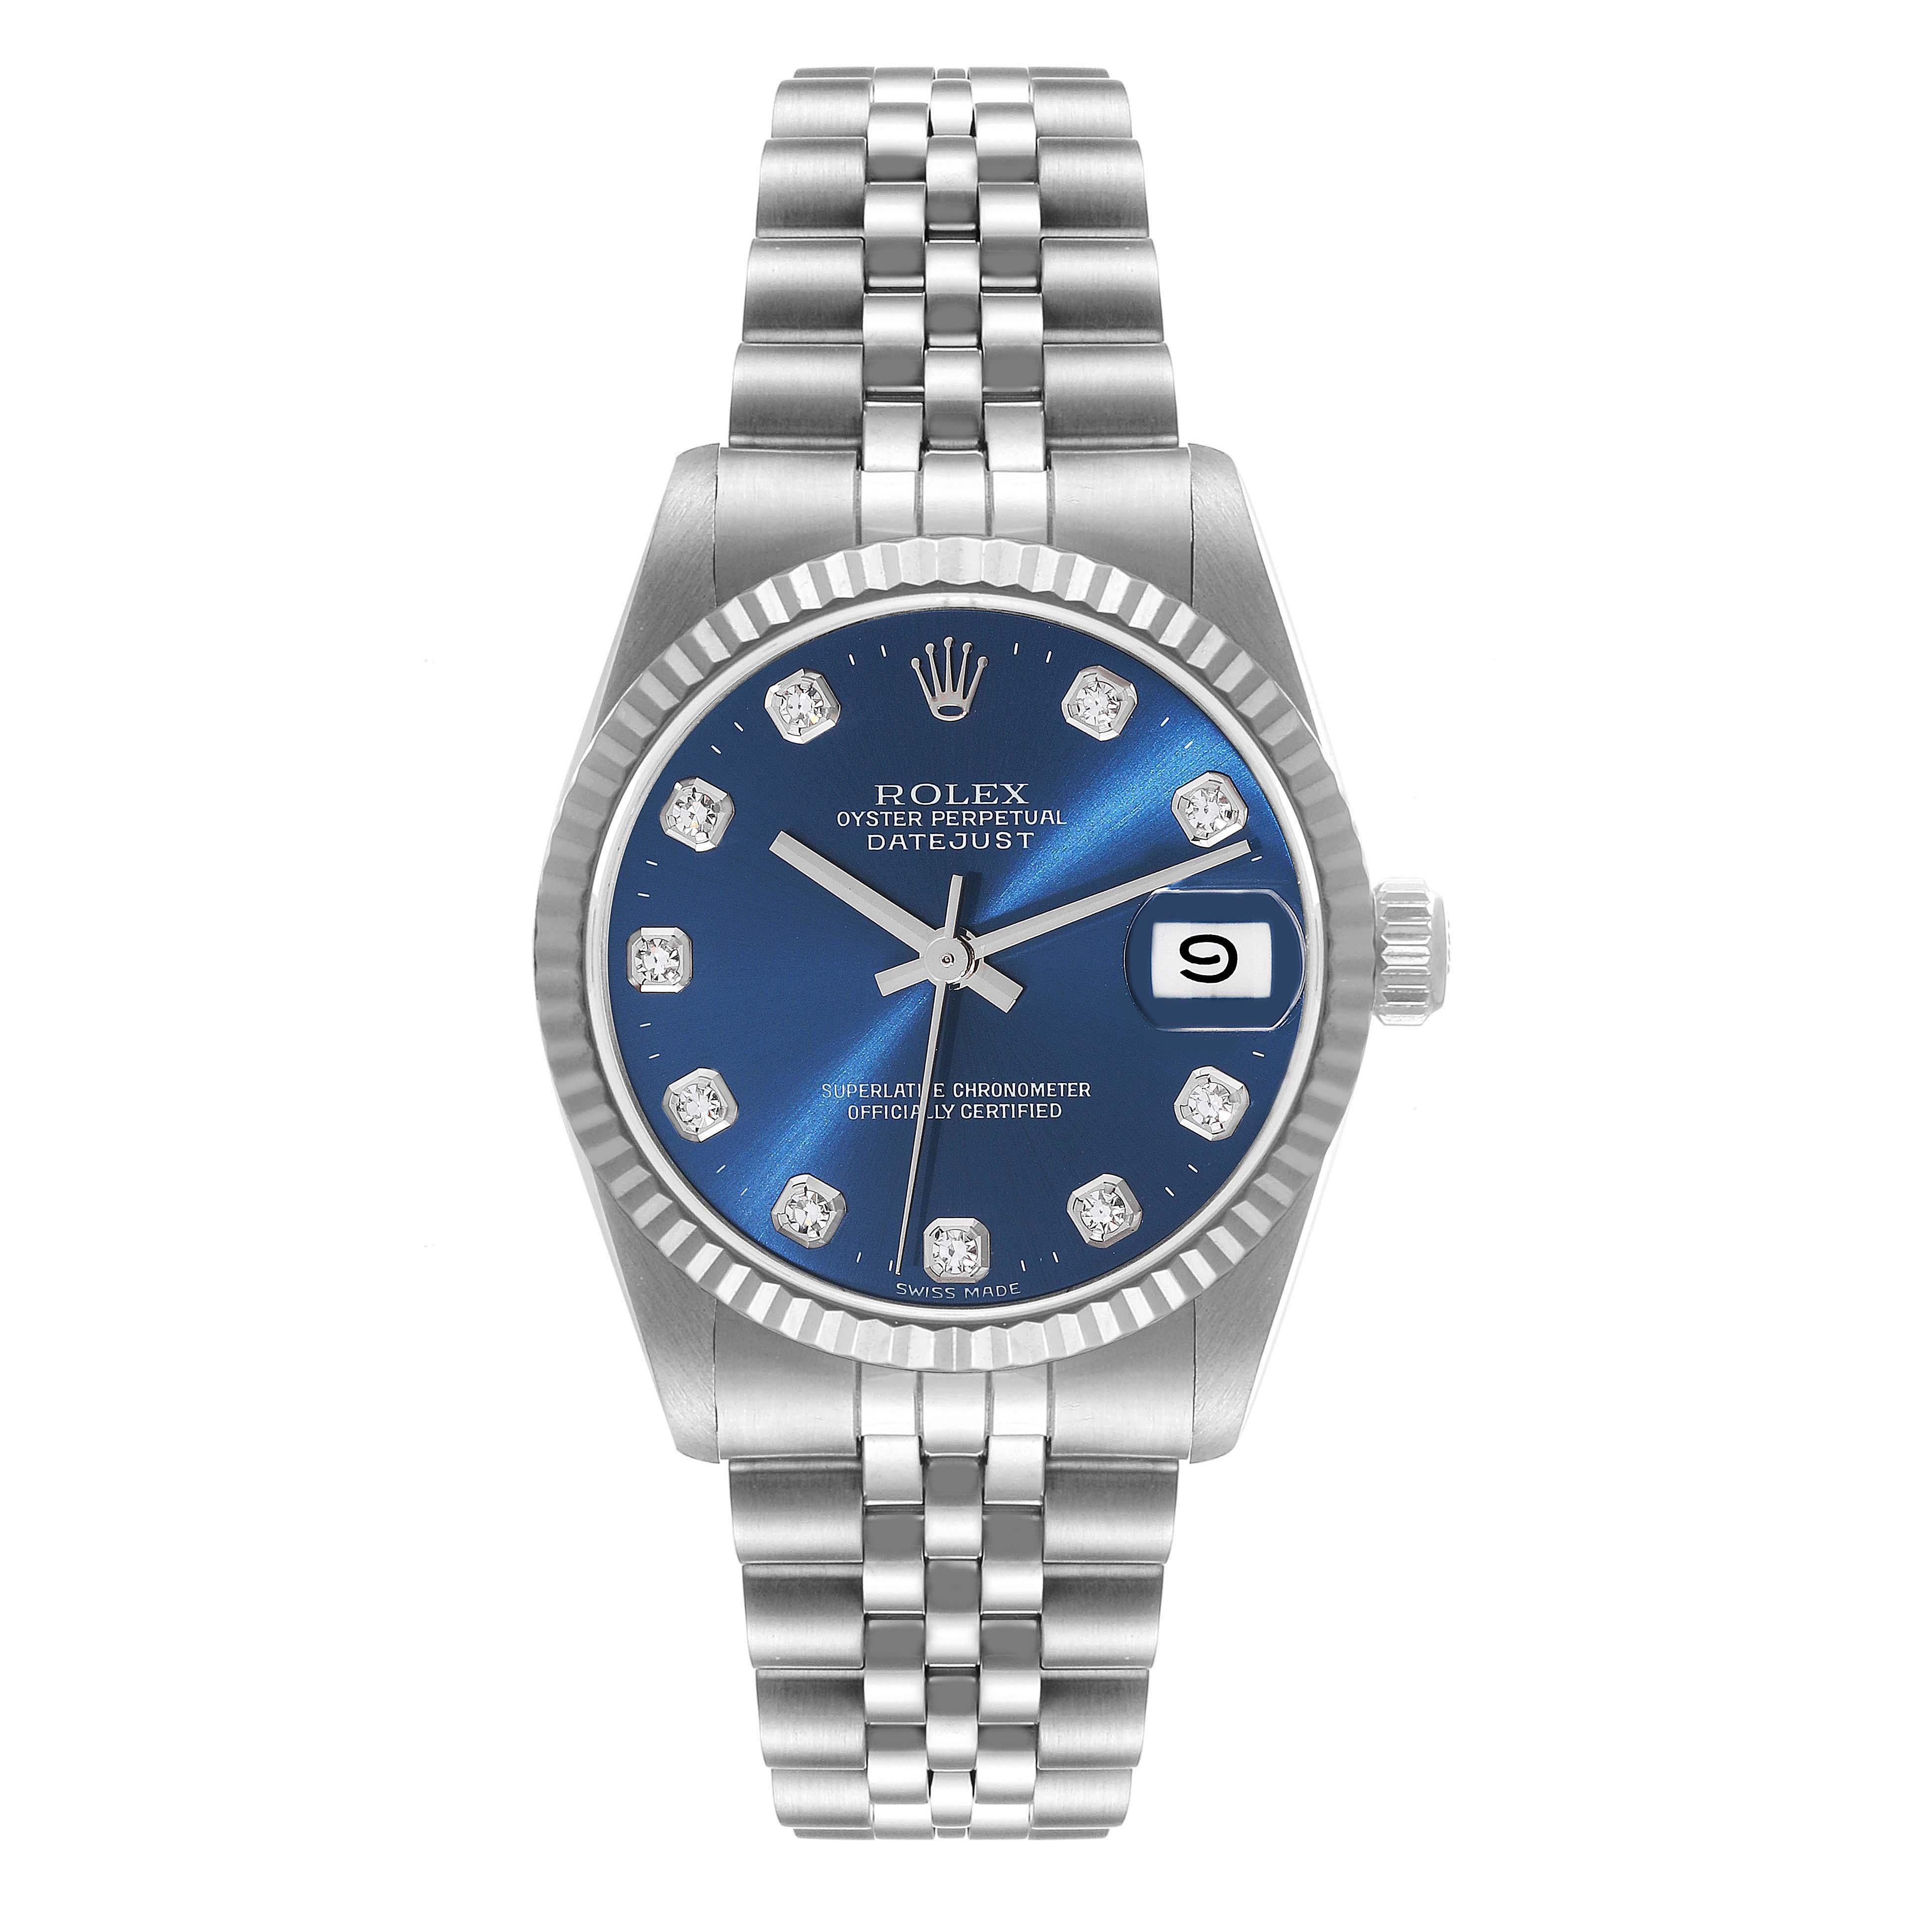 Rolex Datejust Midsize Steel White Gold Diamond Dial Watch 68274. Officially certified chronometer automatic self-winding movement. Stainless steel oyster case 31.0 mm in diameter. Rolex logo on the crown. 18k white gold fluted bezel. Scratch